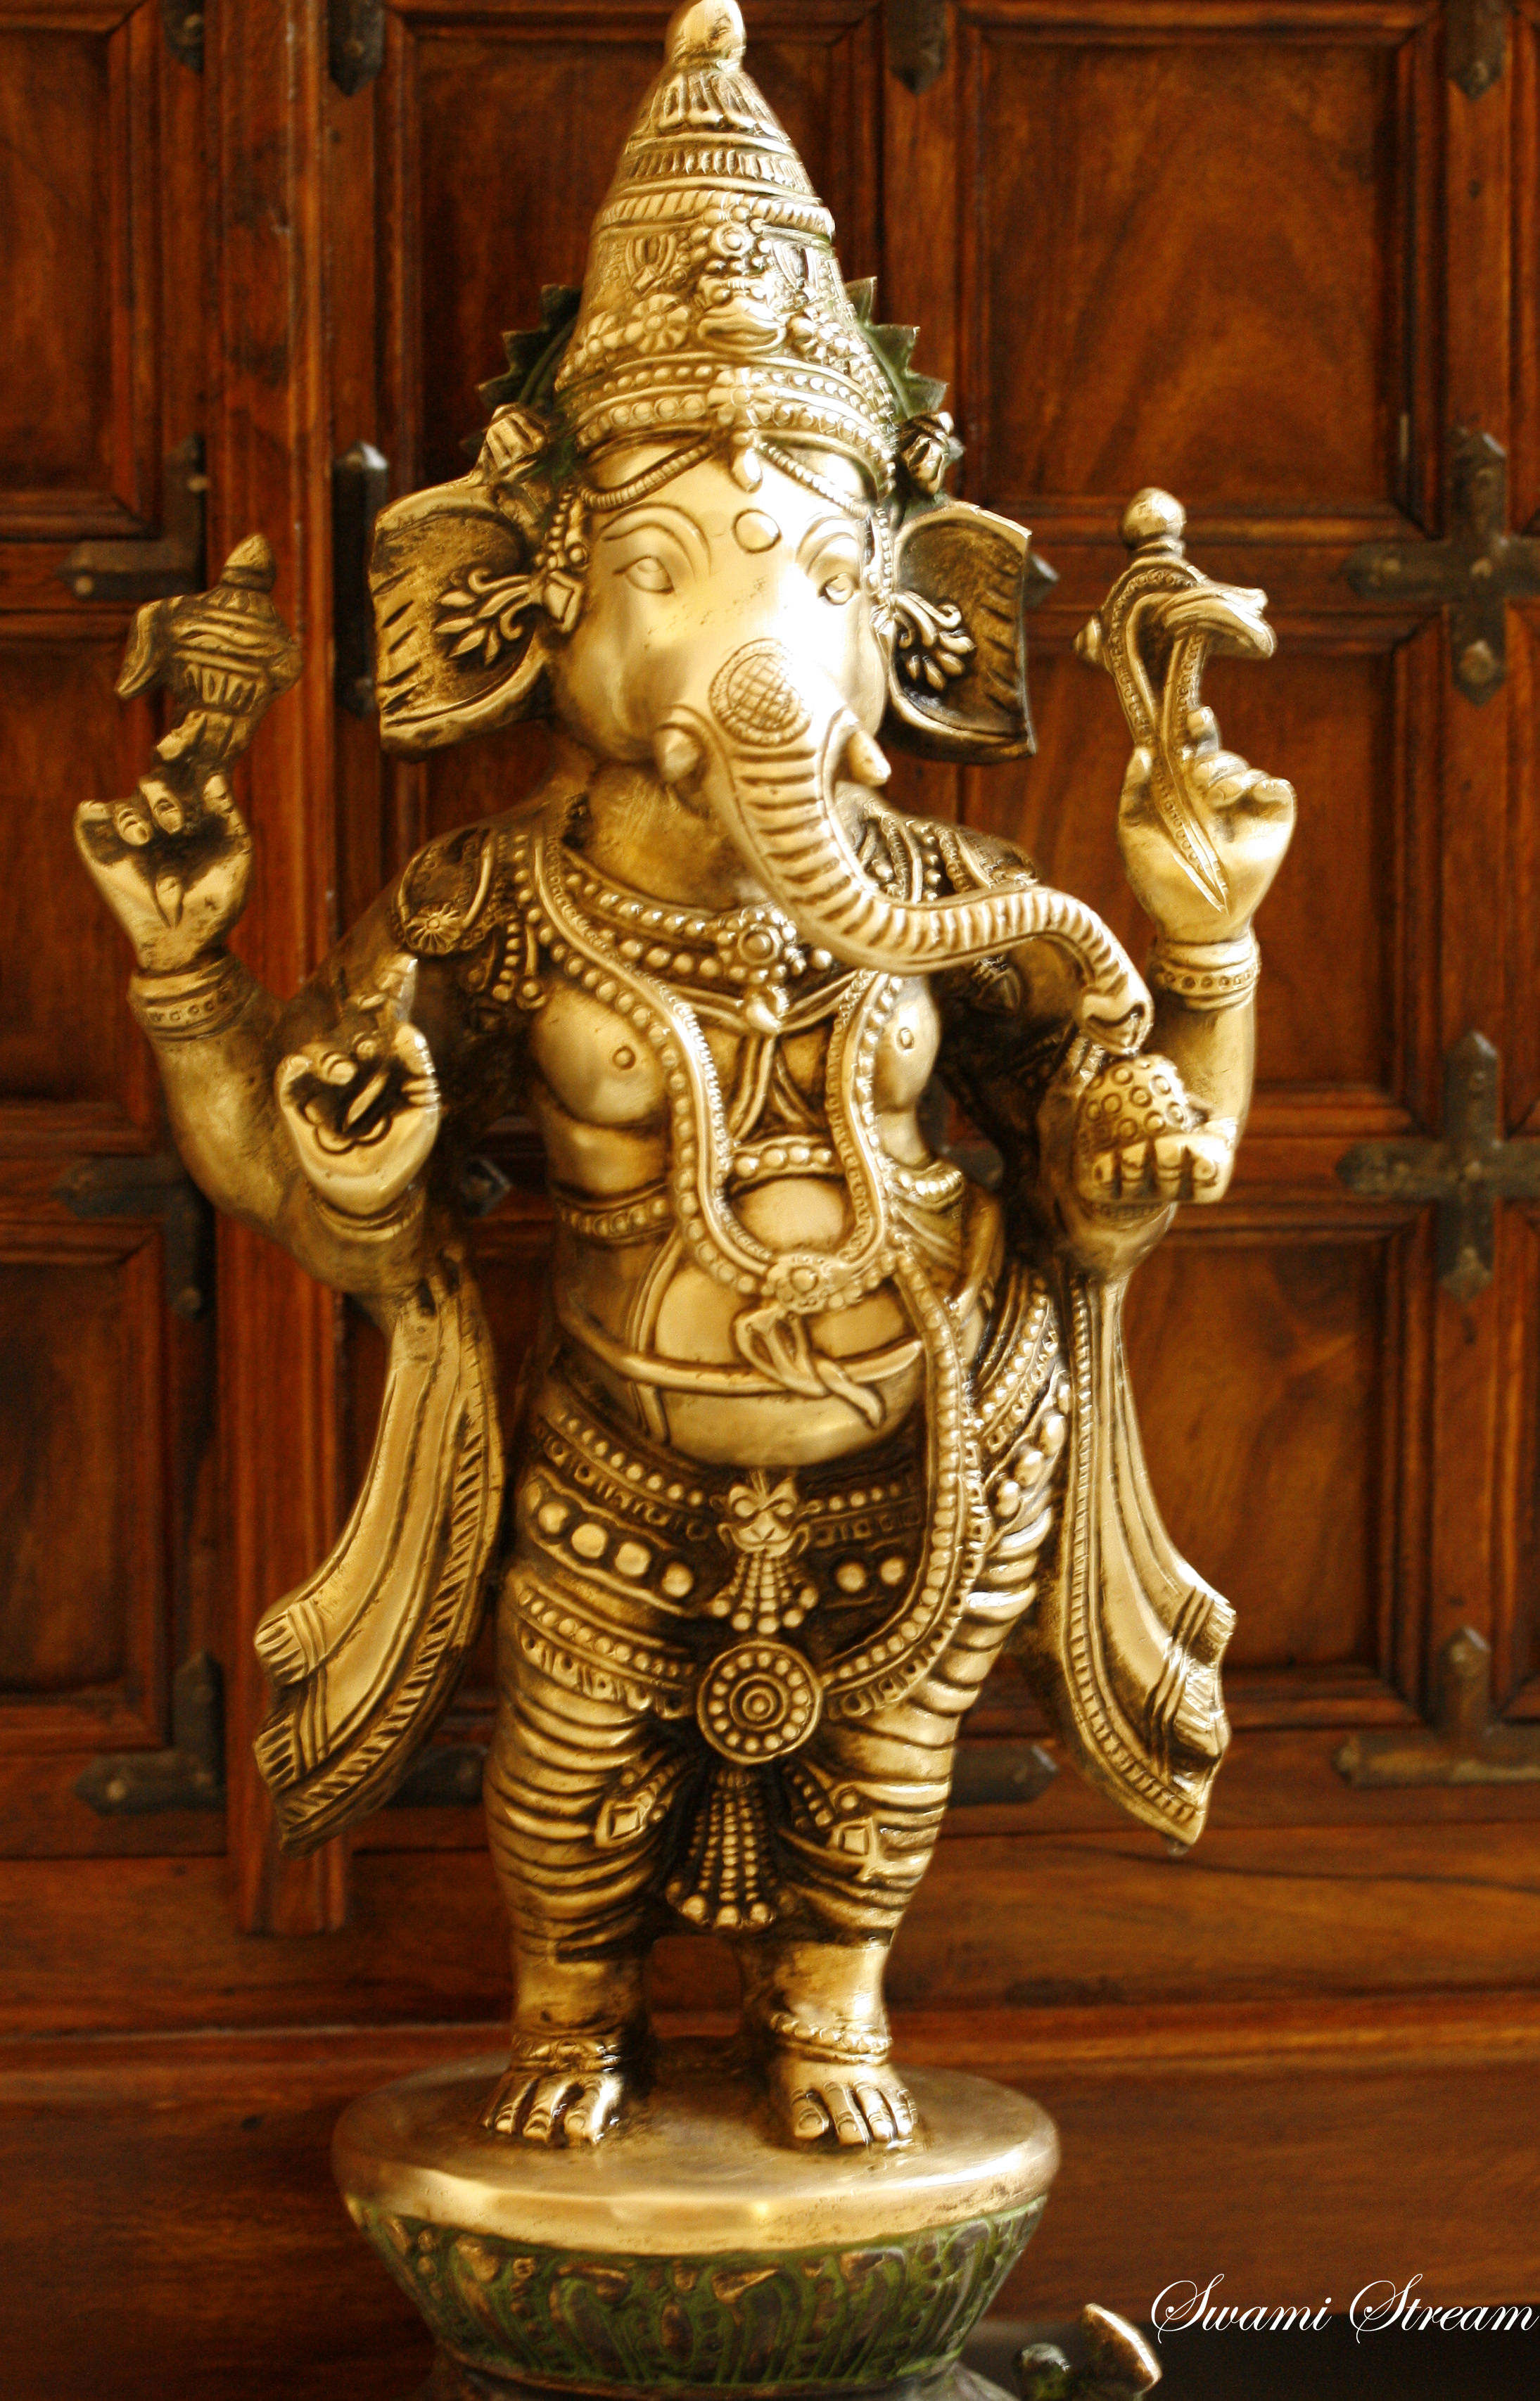 Ganesha  Meaning, Features & Symbolism - Video & Lesson